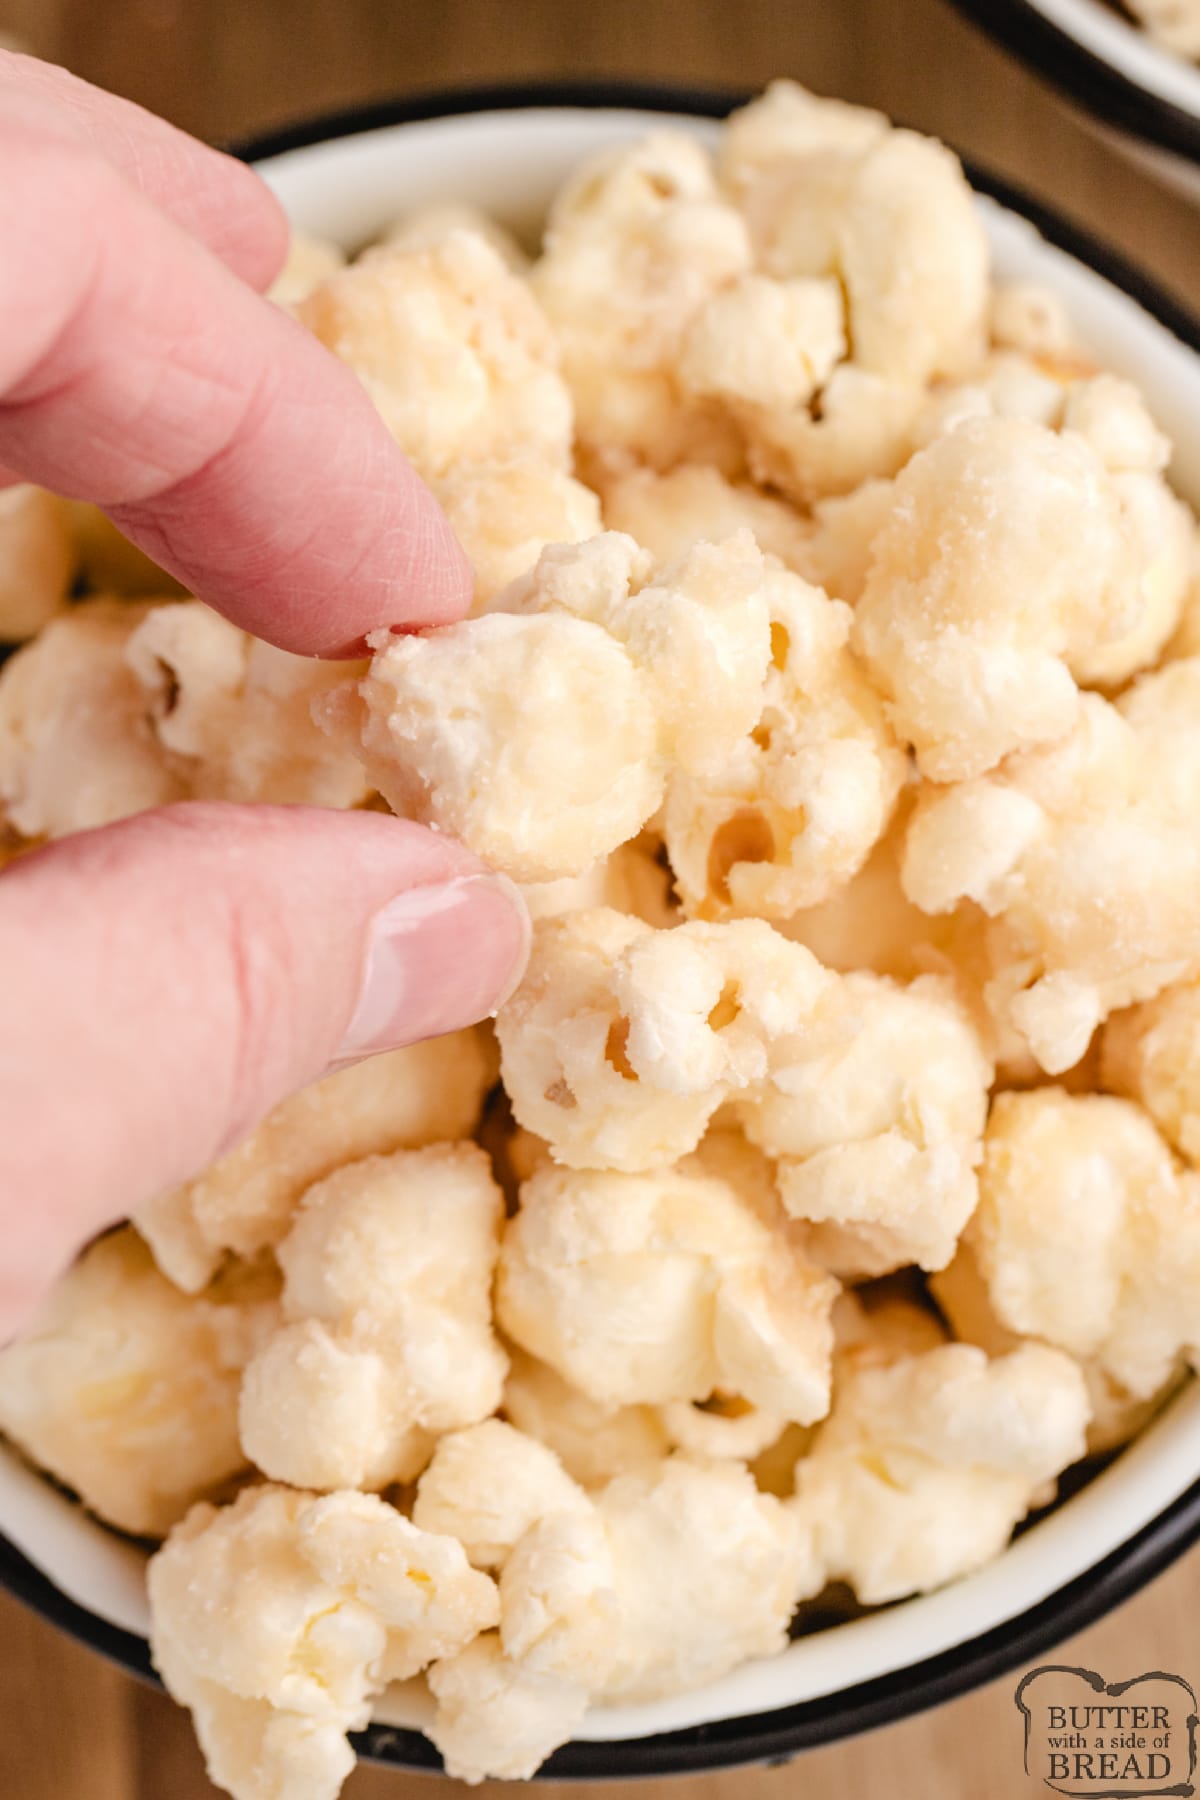 Popcorn made with cream, butter and sugar